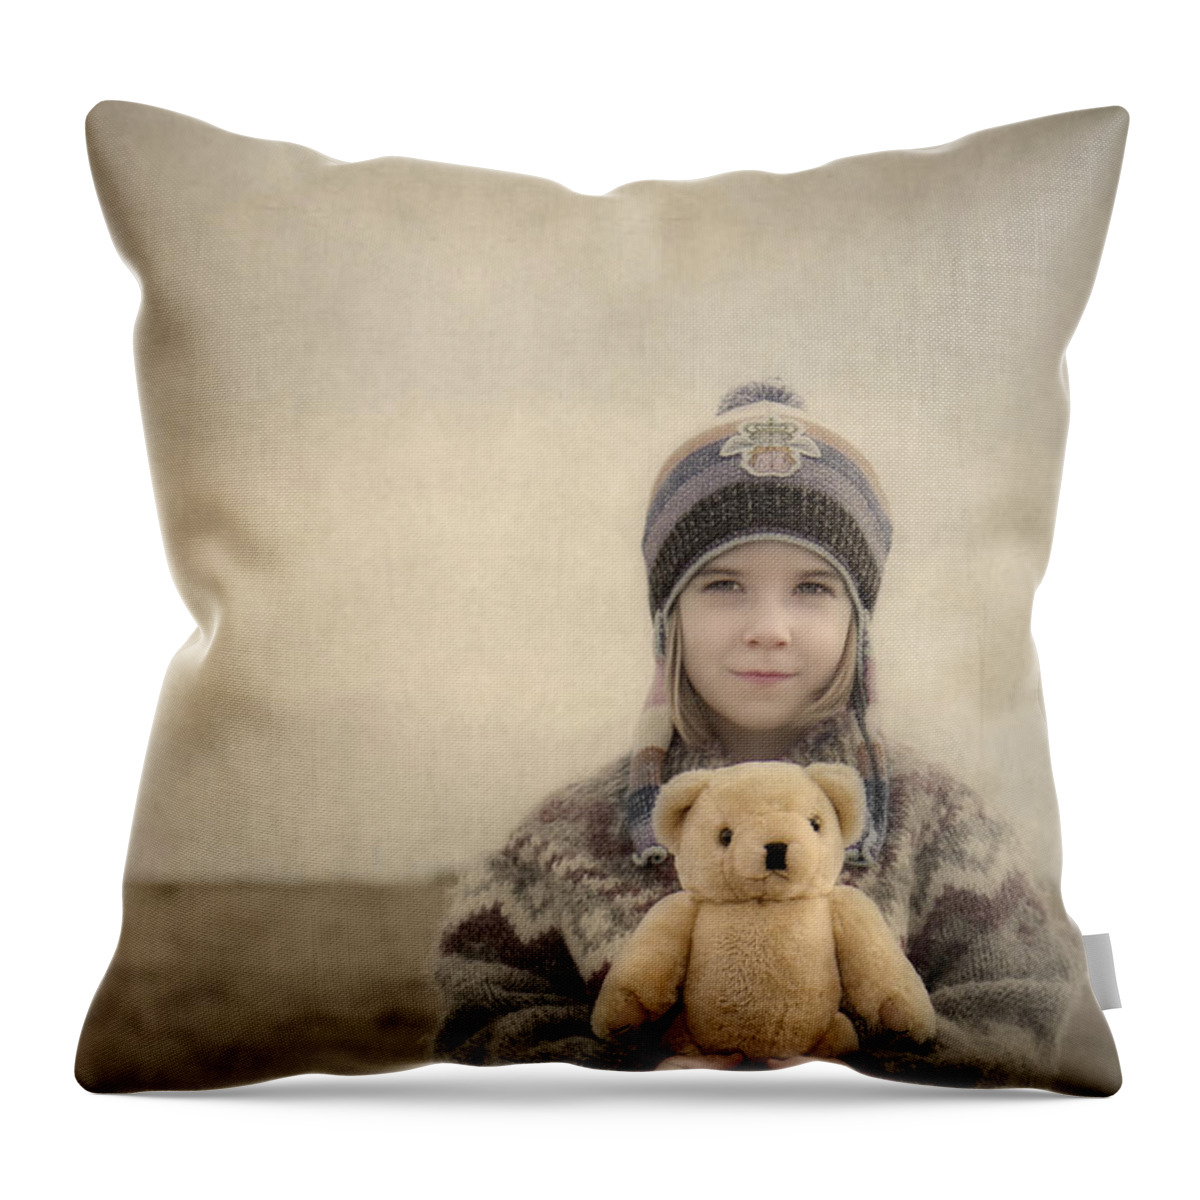 Girl Throw Pillow featuring the photograph Together They Dream Into The Evening by Evelina Kremsdorf